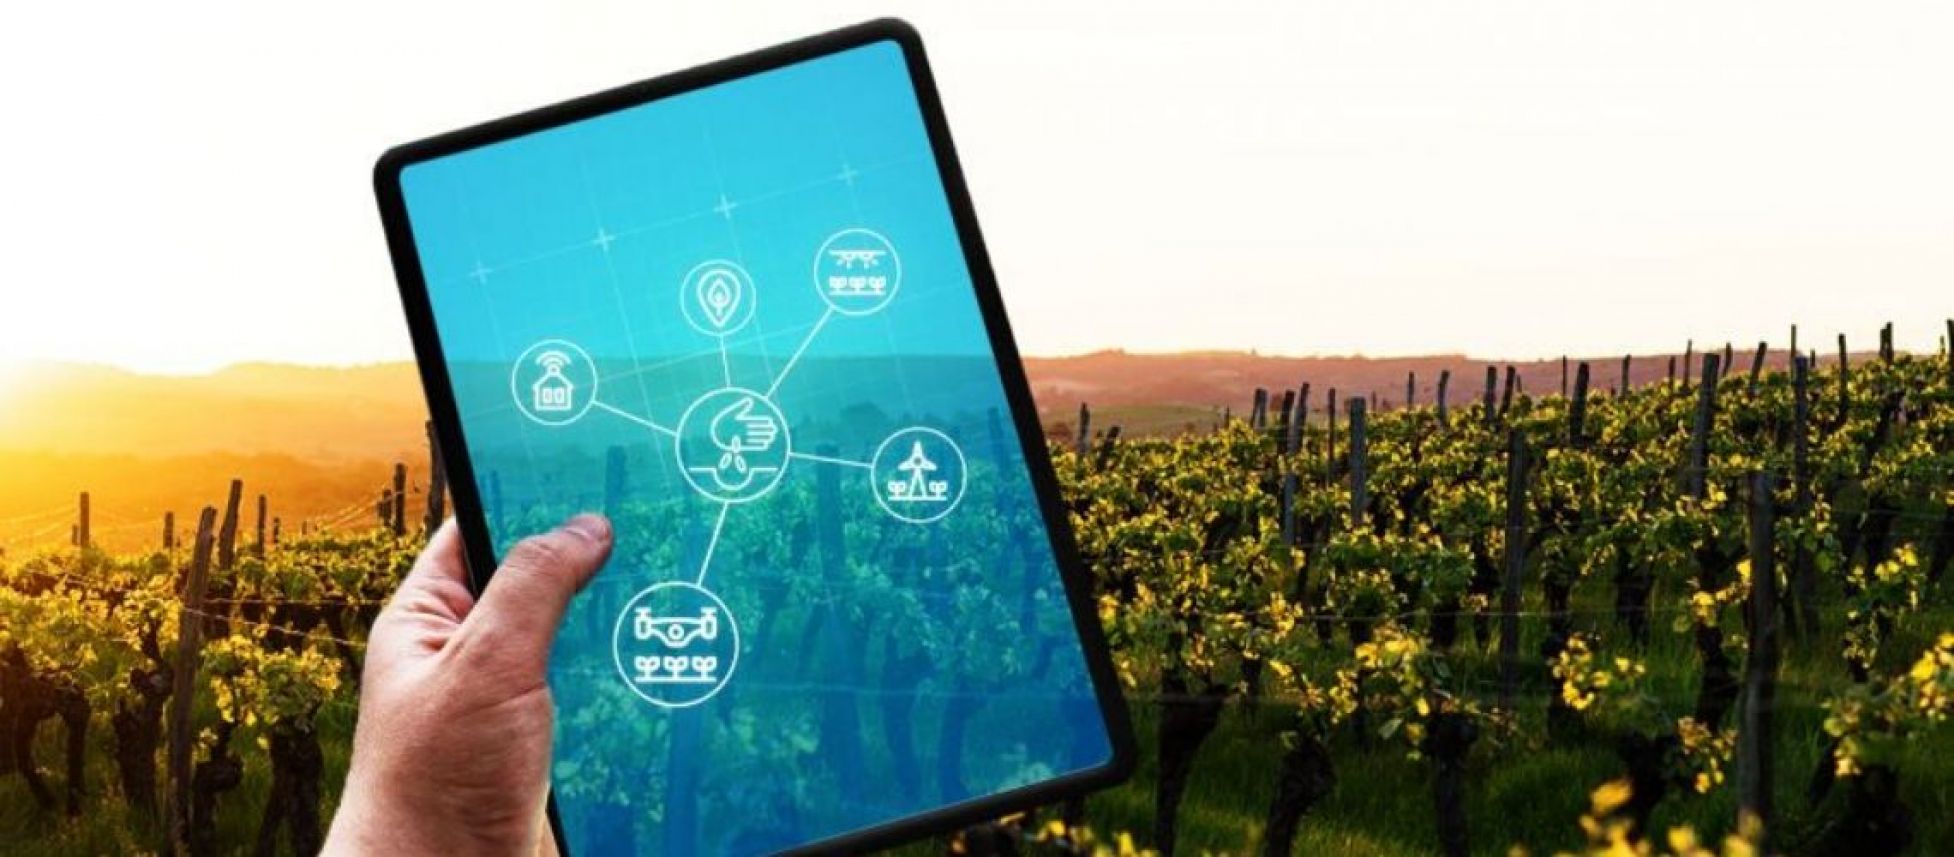 Photo for: Why the Internet of Things Will Lead to the Internet of Wines